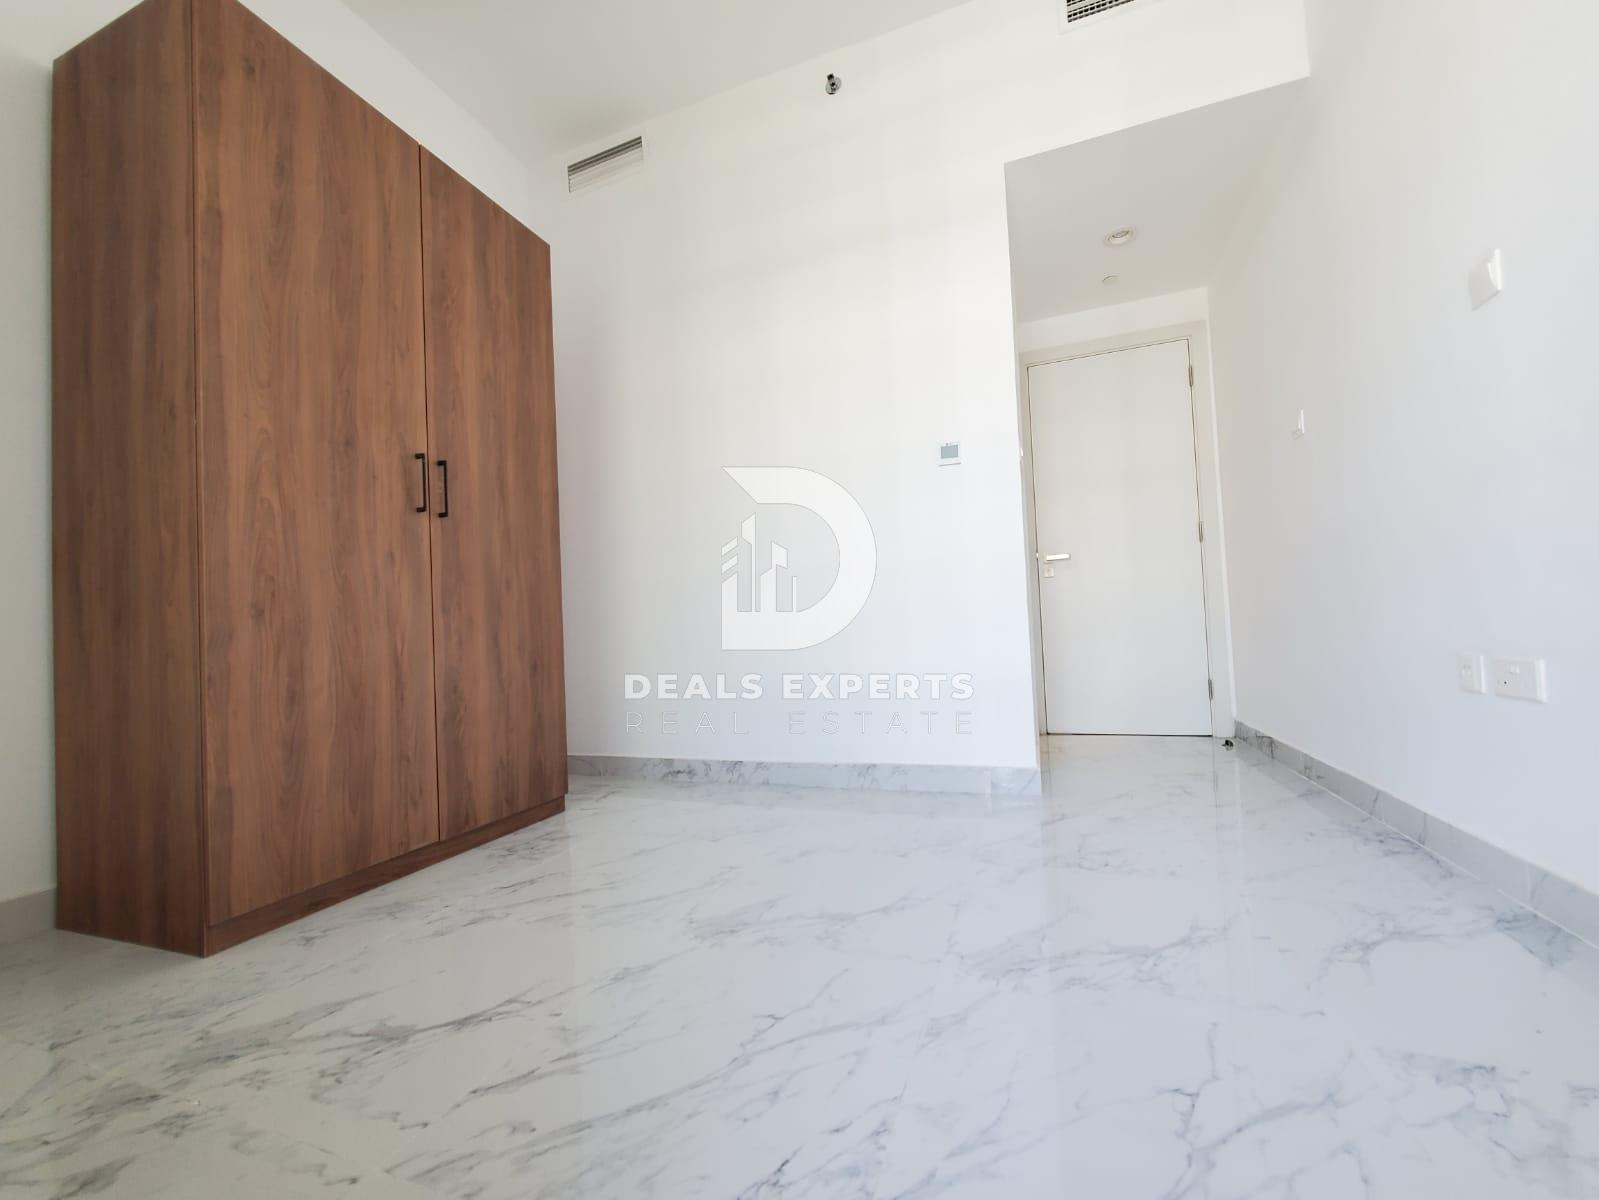 2 bed, 3 bath Apartment for rent in Oasis 1, Oasis Residences, Masdar City, Abu Dhabi for price AED 80000 yearly 